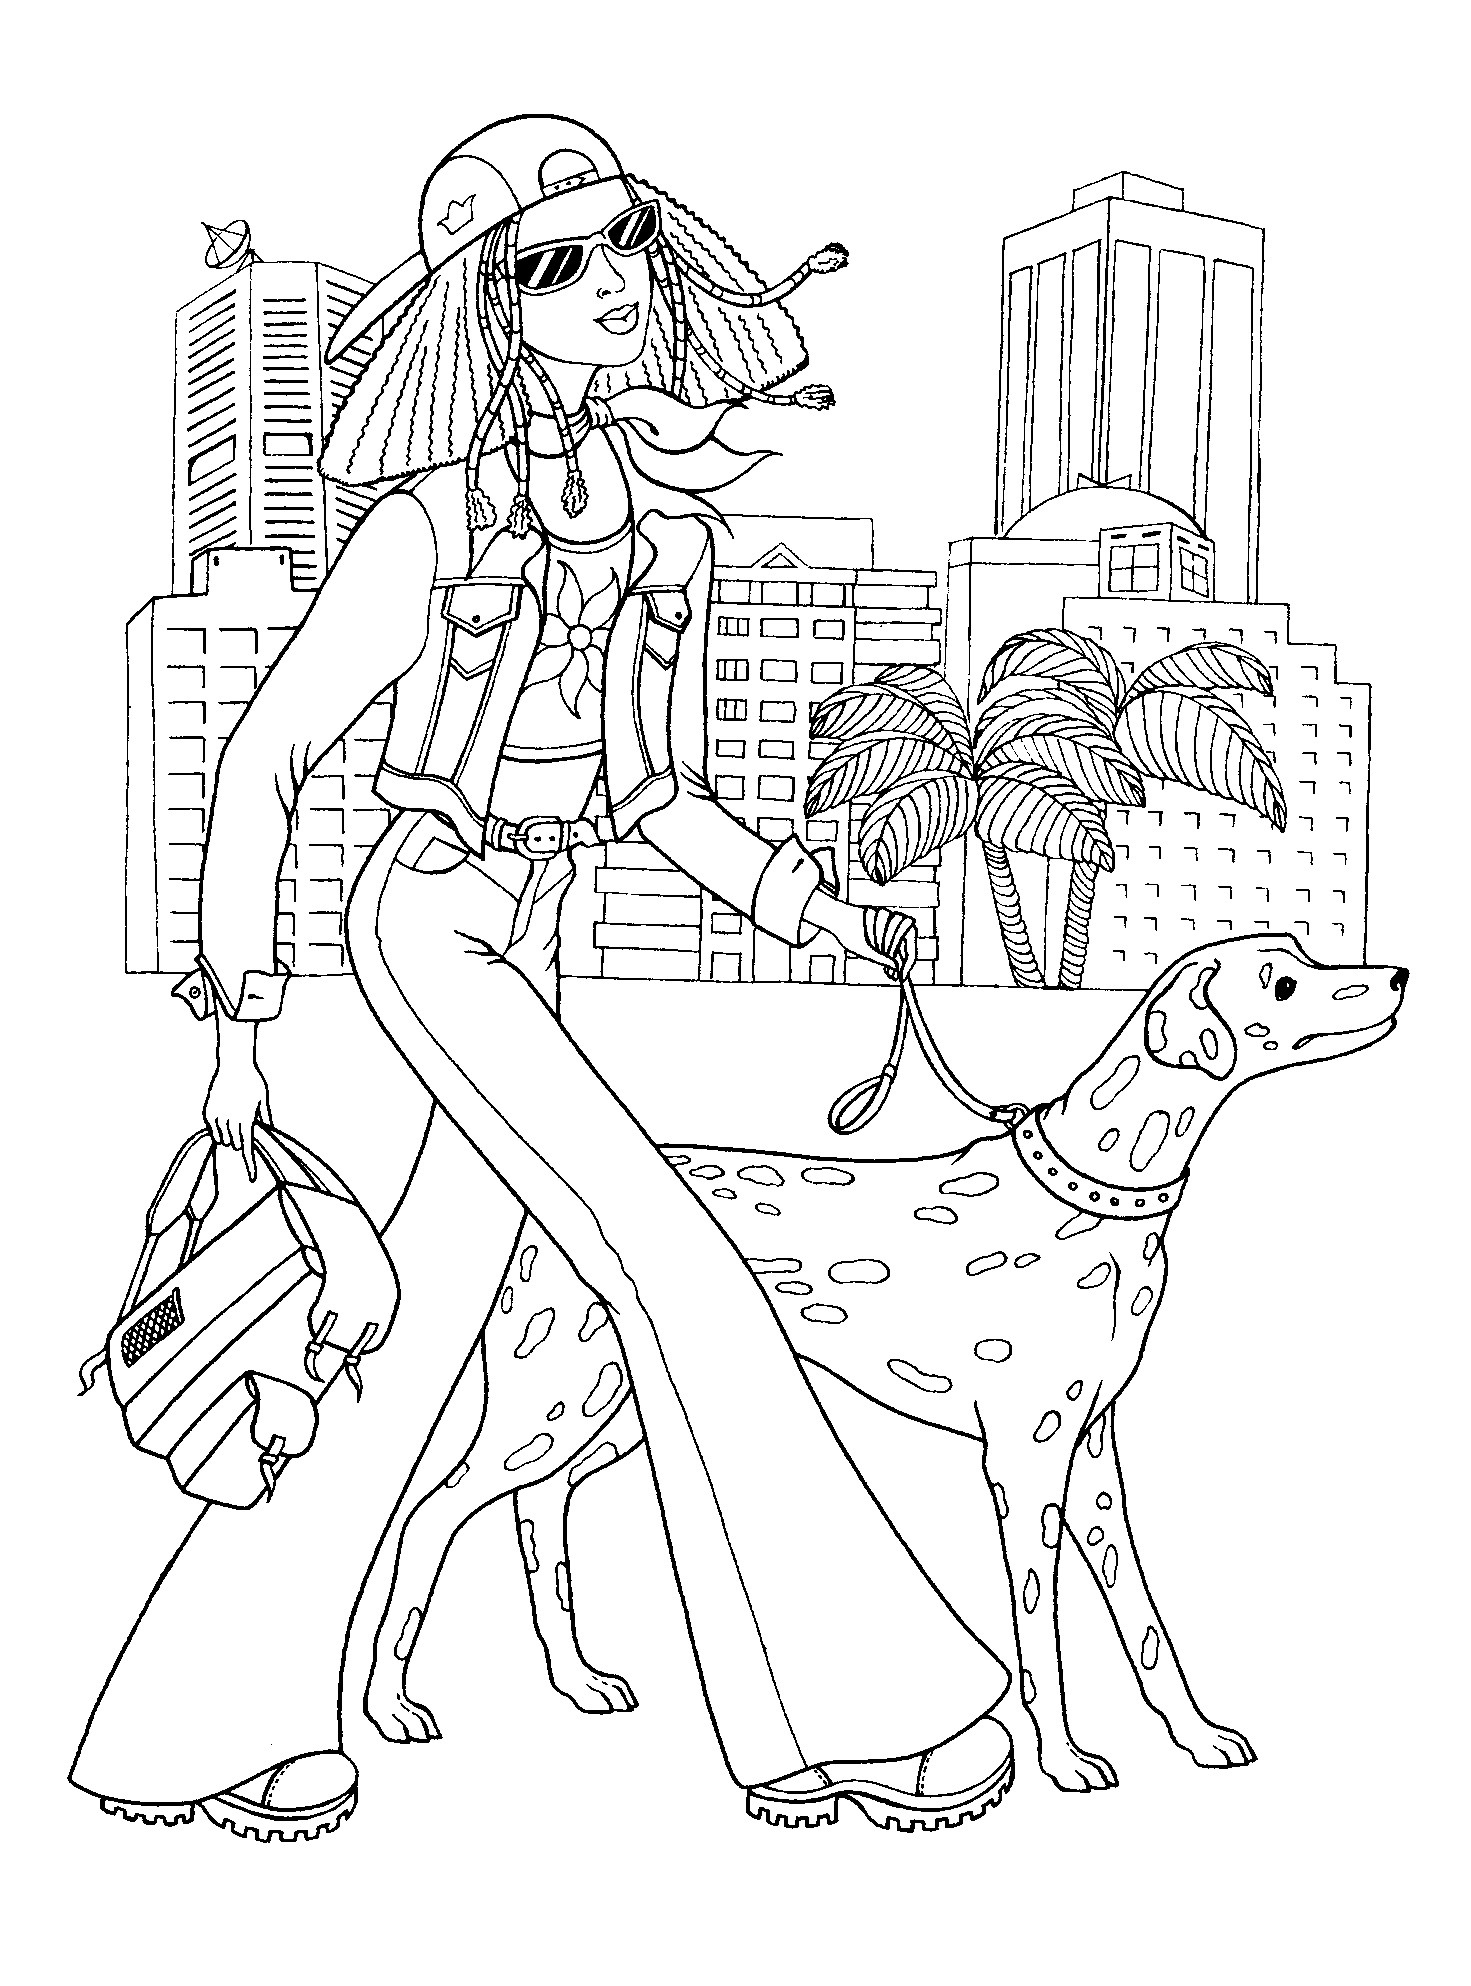 Coloring Book For Girls
 45 Free Coloring Pages for Teens